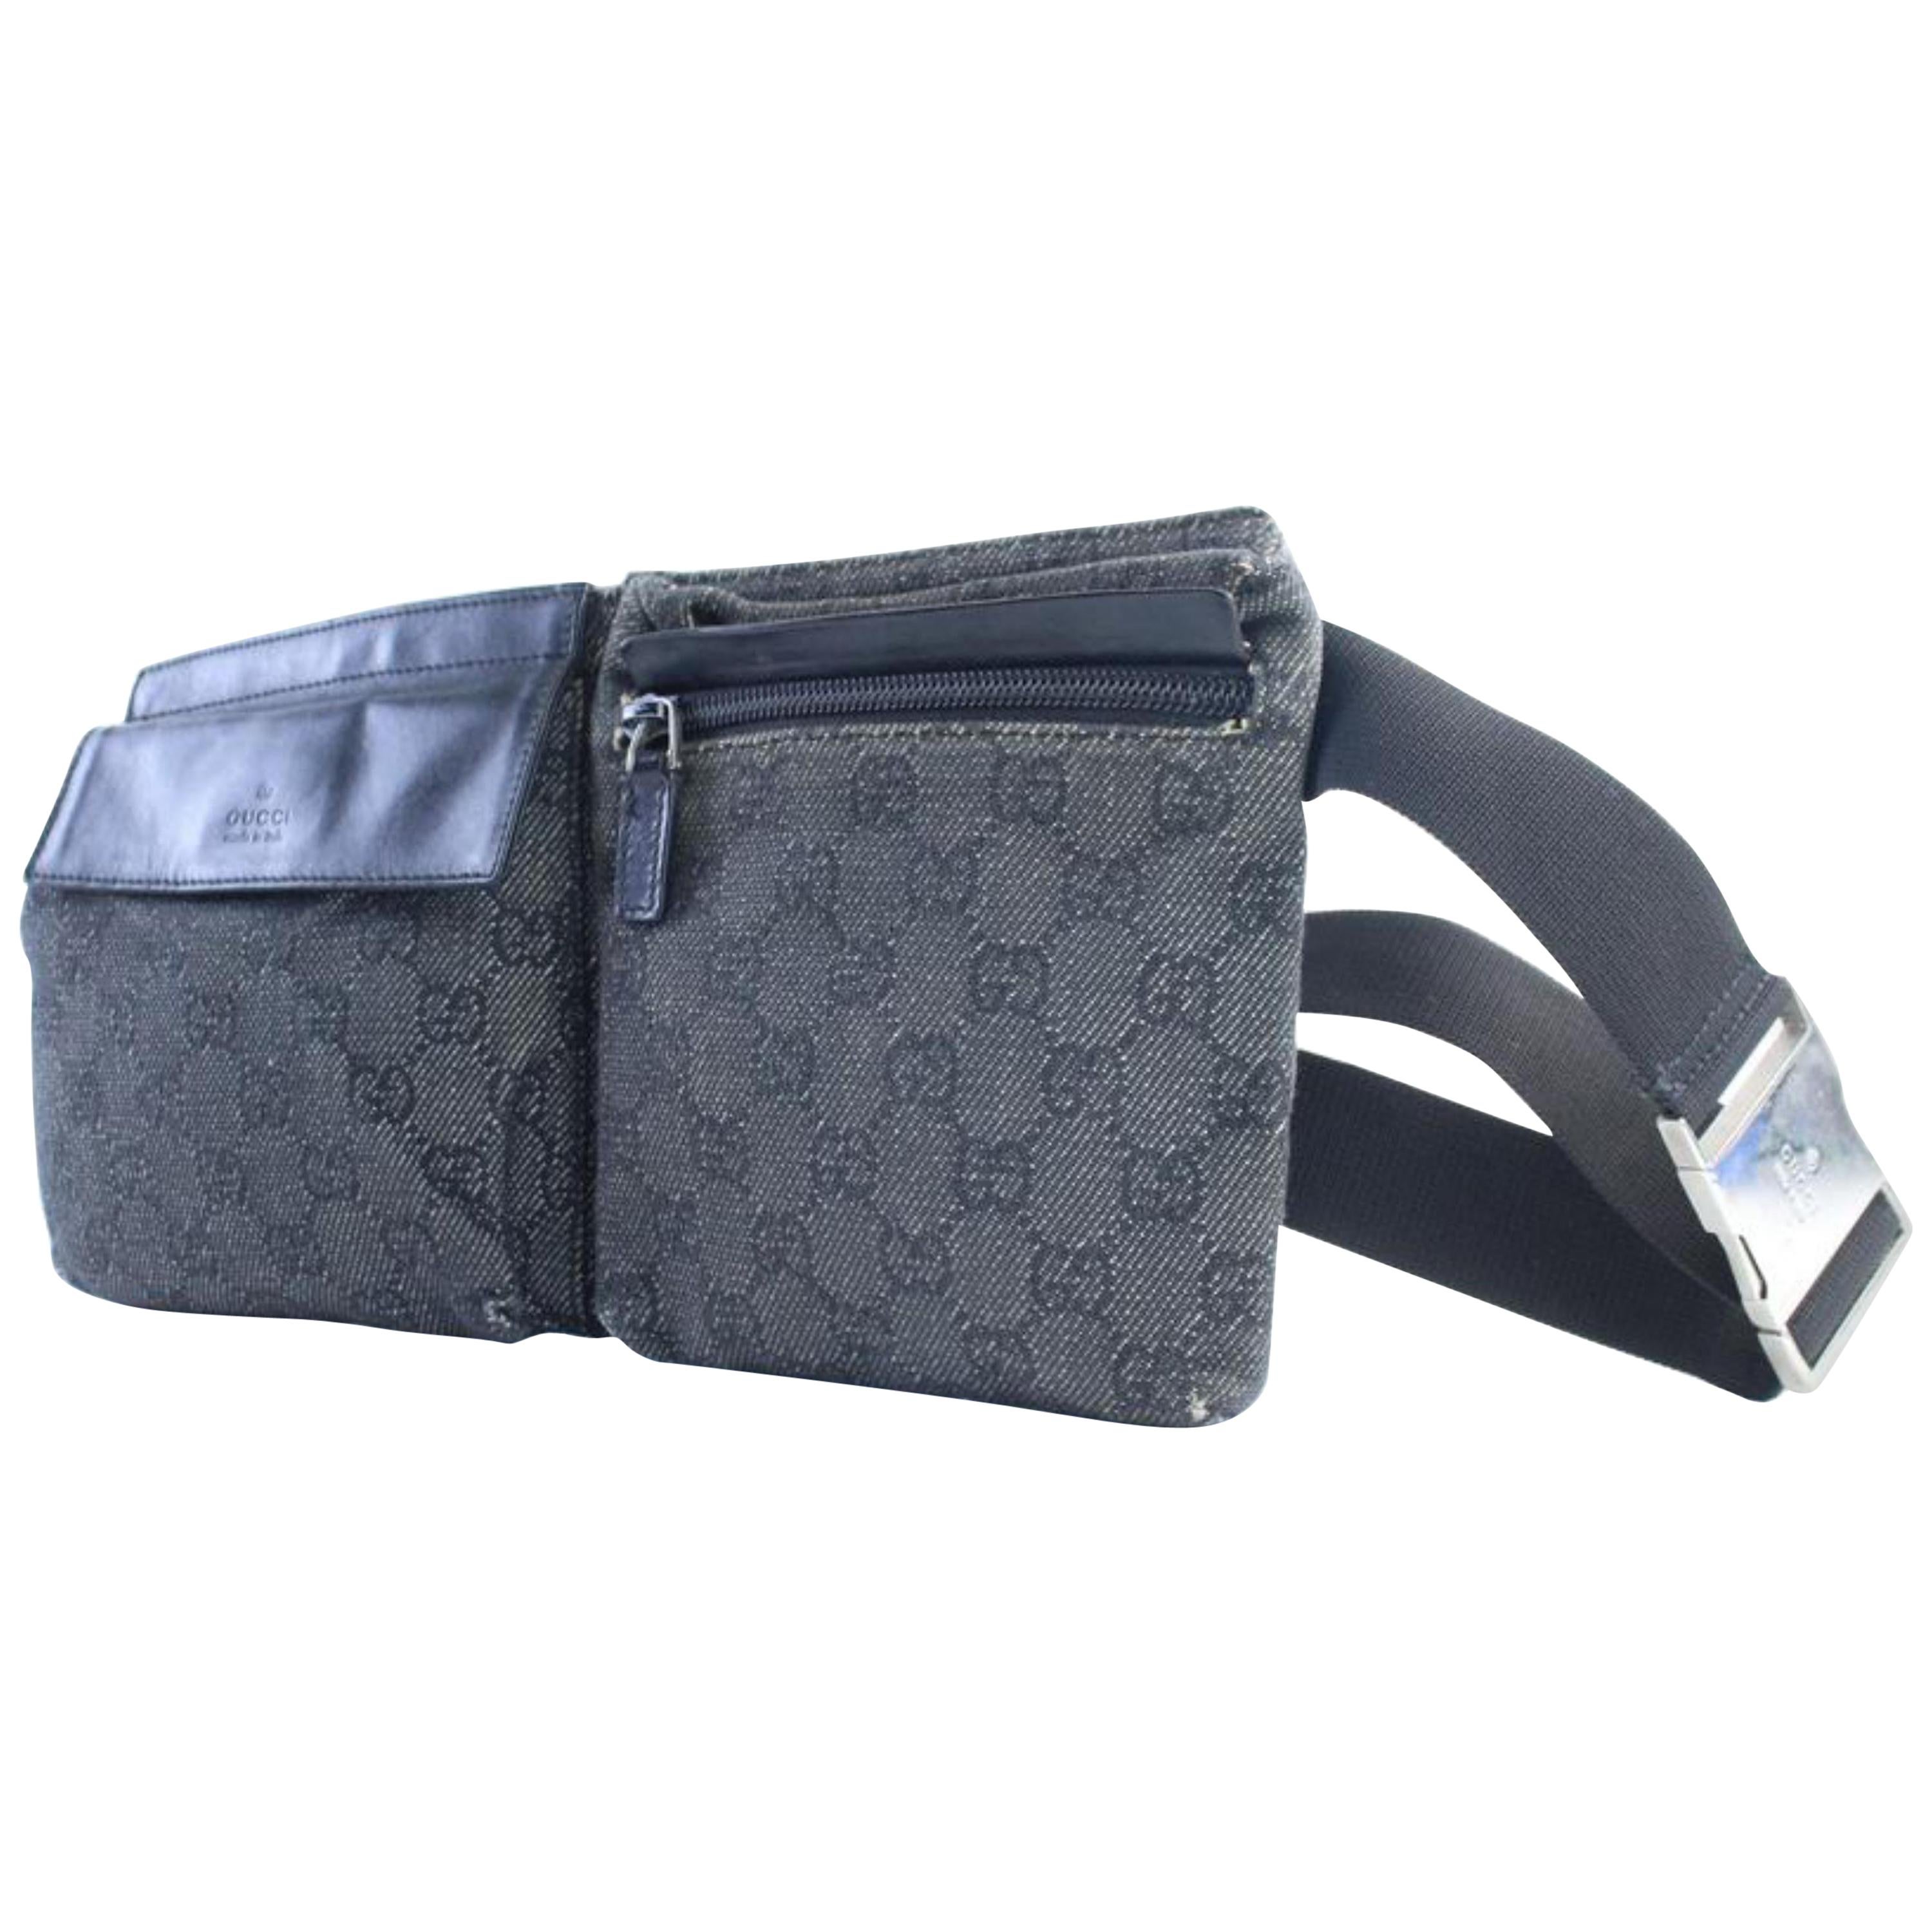 Gucci Gg Denim Fanny Pack Waist Pouch 228533 Charcoal Coated Canvas Travel Bag For Sale